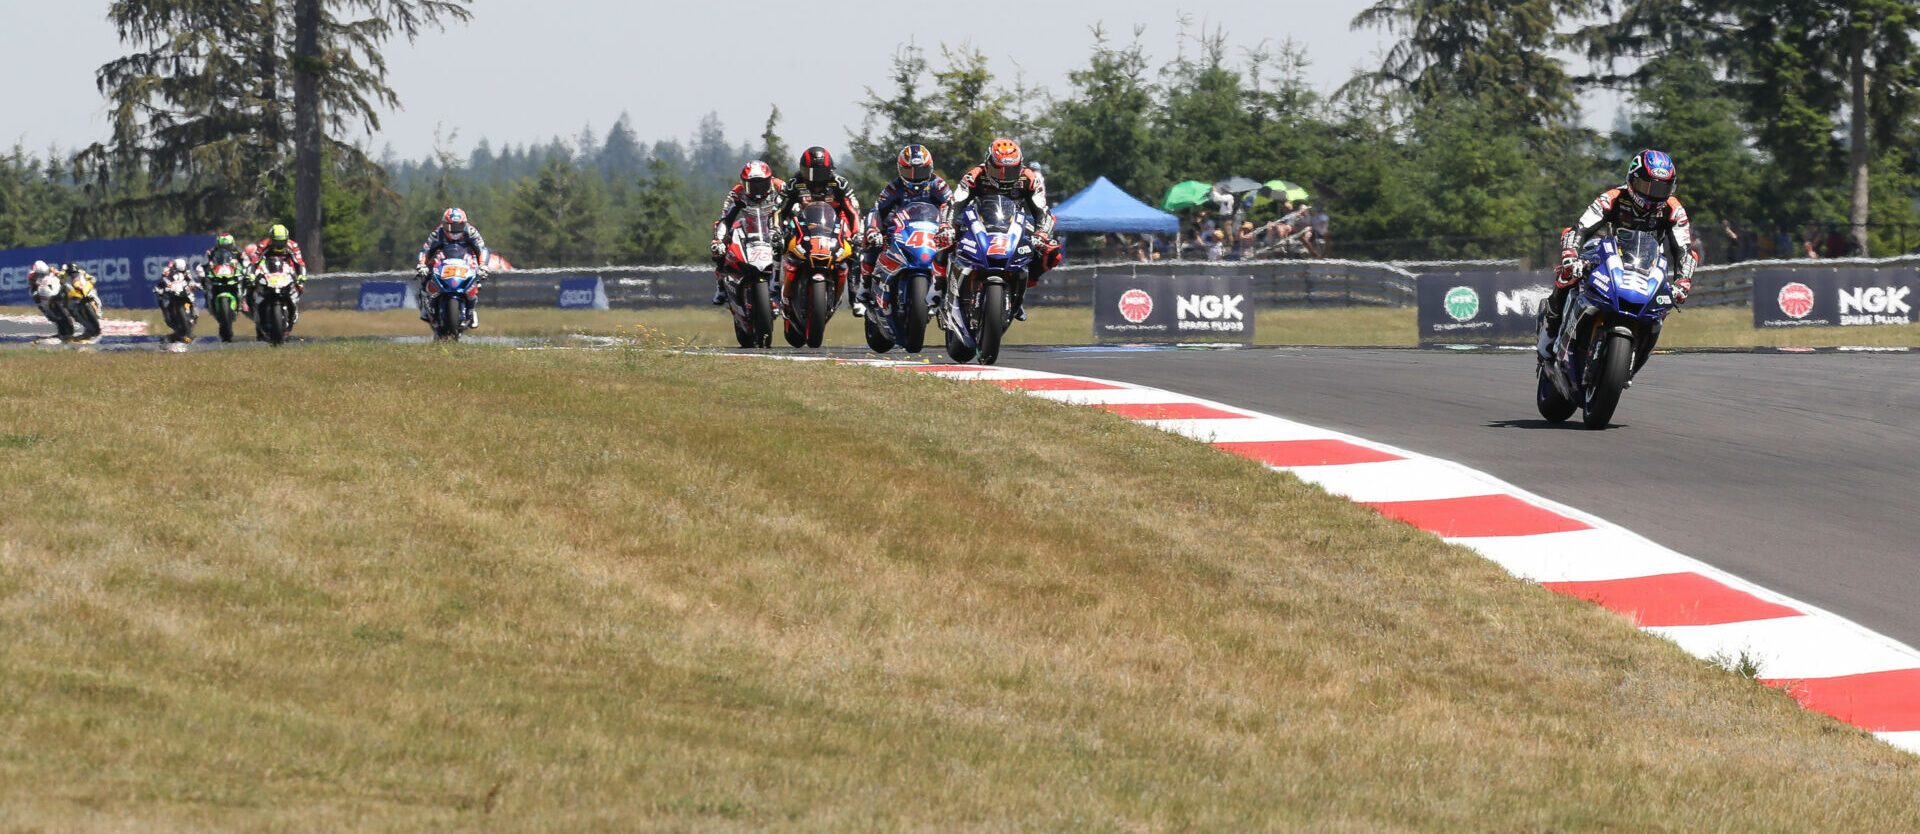 Jake Gagne (32) leads Josh Herrin (2), Cameron Petersen (32), Mathew Scholtz (11), Loris Baz (76), Bobby Fong (50), and the rest of the field early in Superbike Race Two at Ridge Motorsports Park in 2021. Photo by Brian J. Nelson.